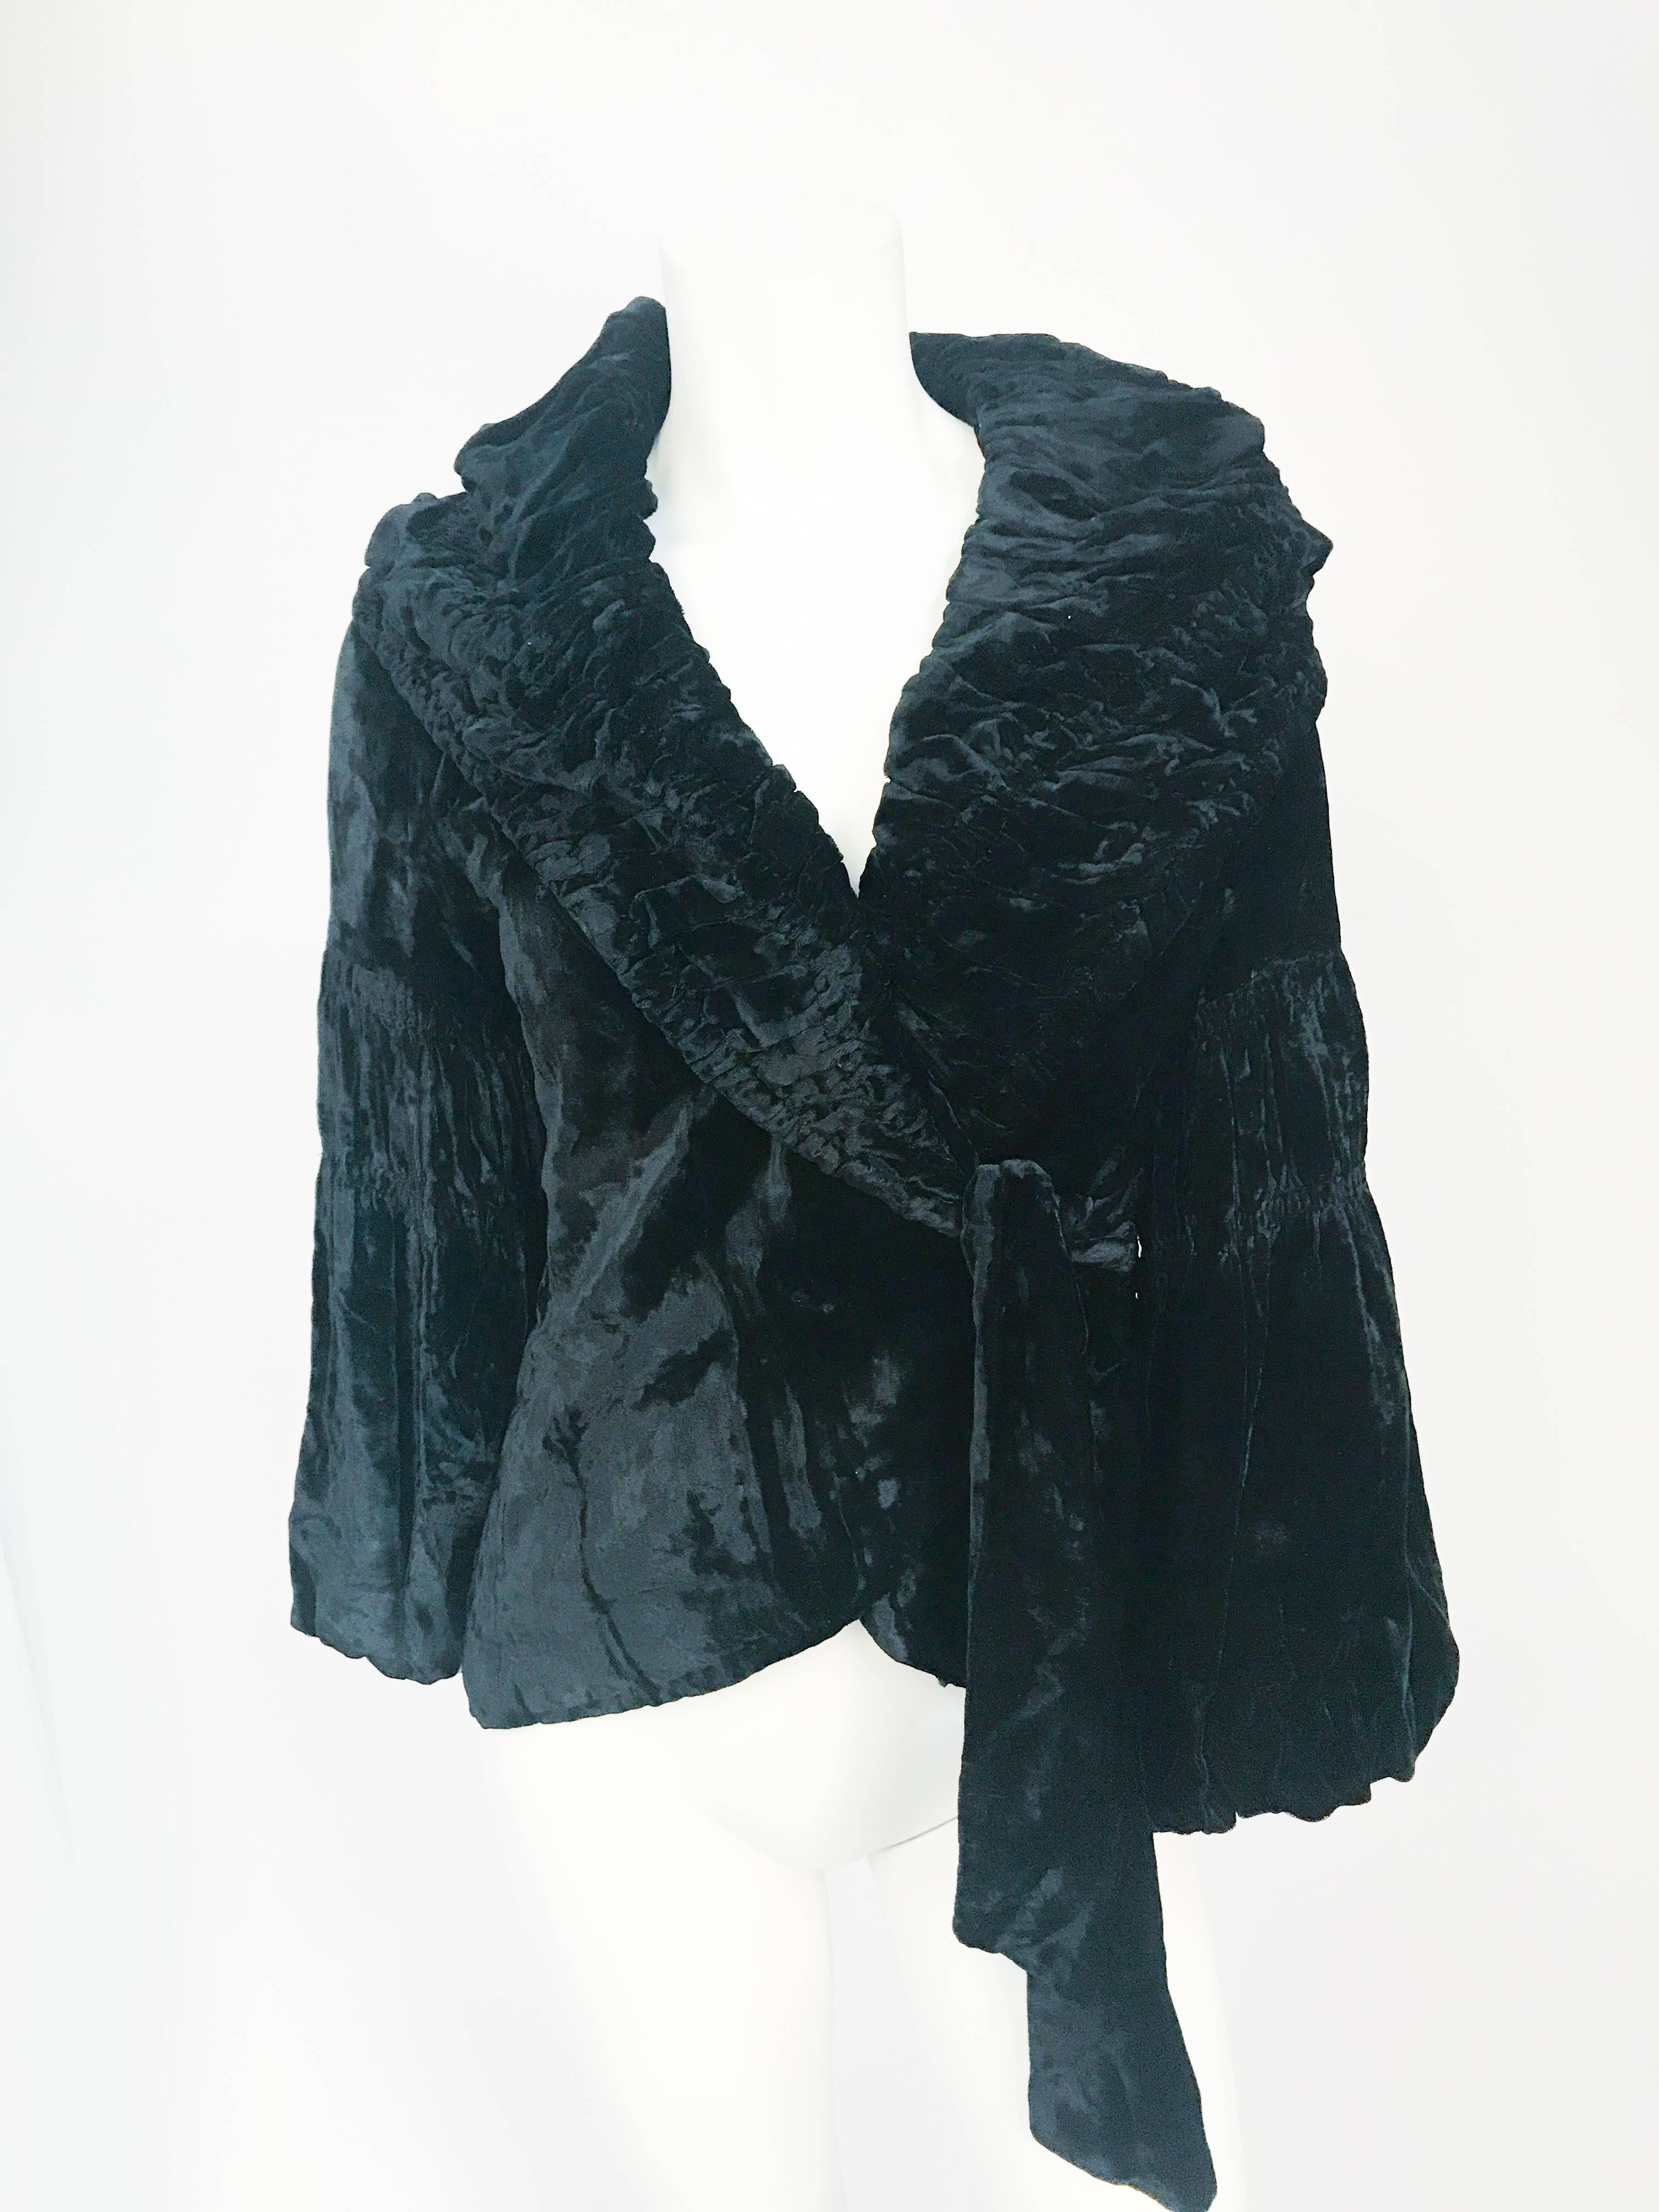 1930s Black Silk Velvet Evening Coat. Black silk velvet evenign coat with rouched sleeves and collar, fully lined in cashmere lining and lace edging, and side tie.